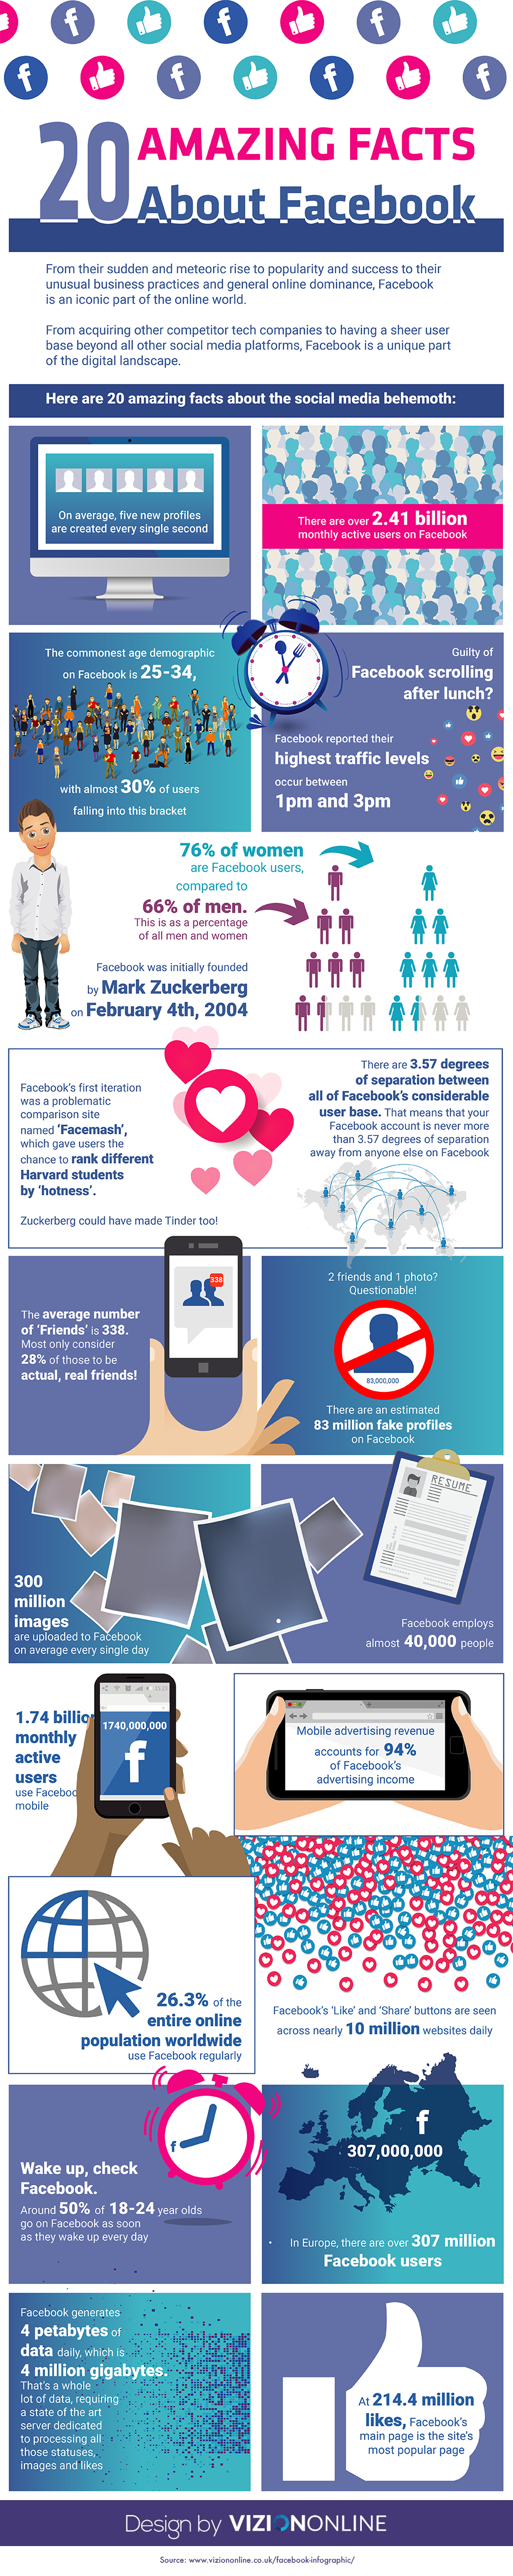 20 Amazing Facts About Facebook